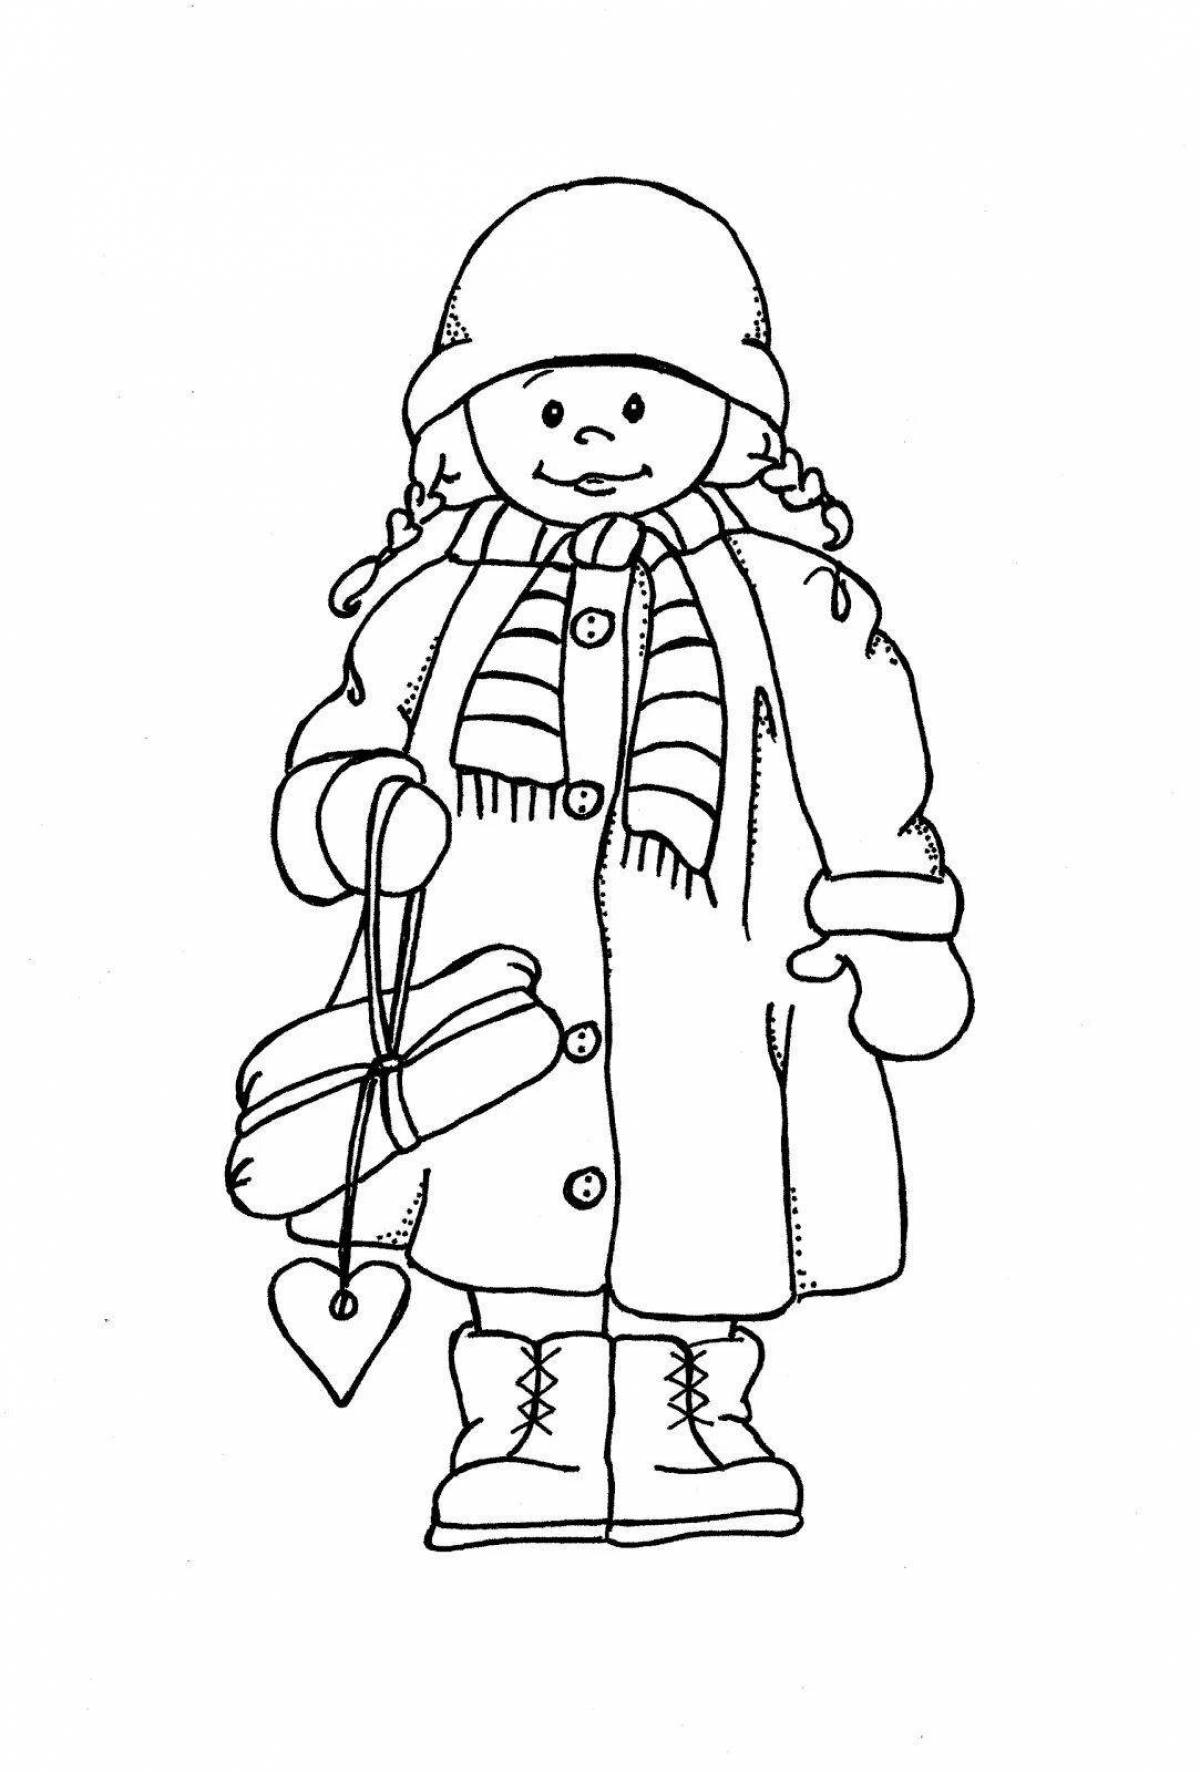 Amazing coloring book of a girl in a fur coat